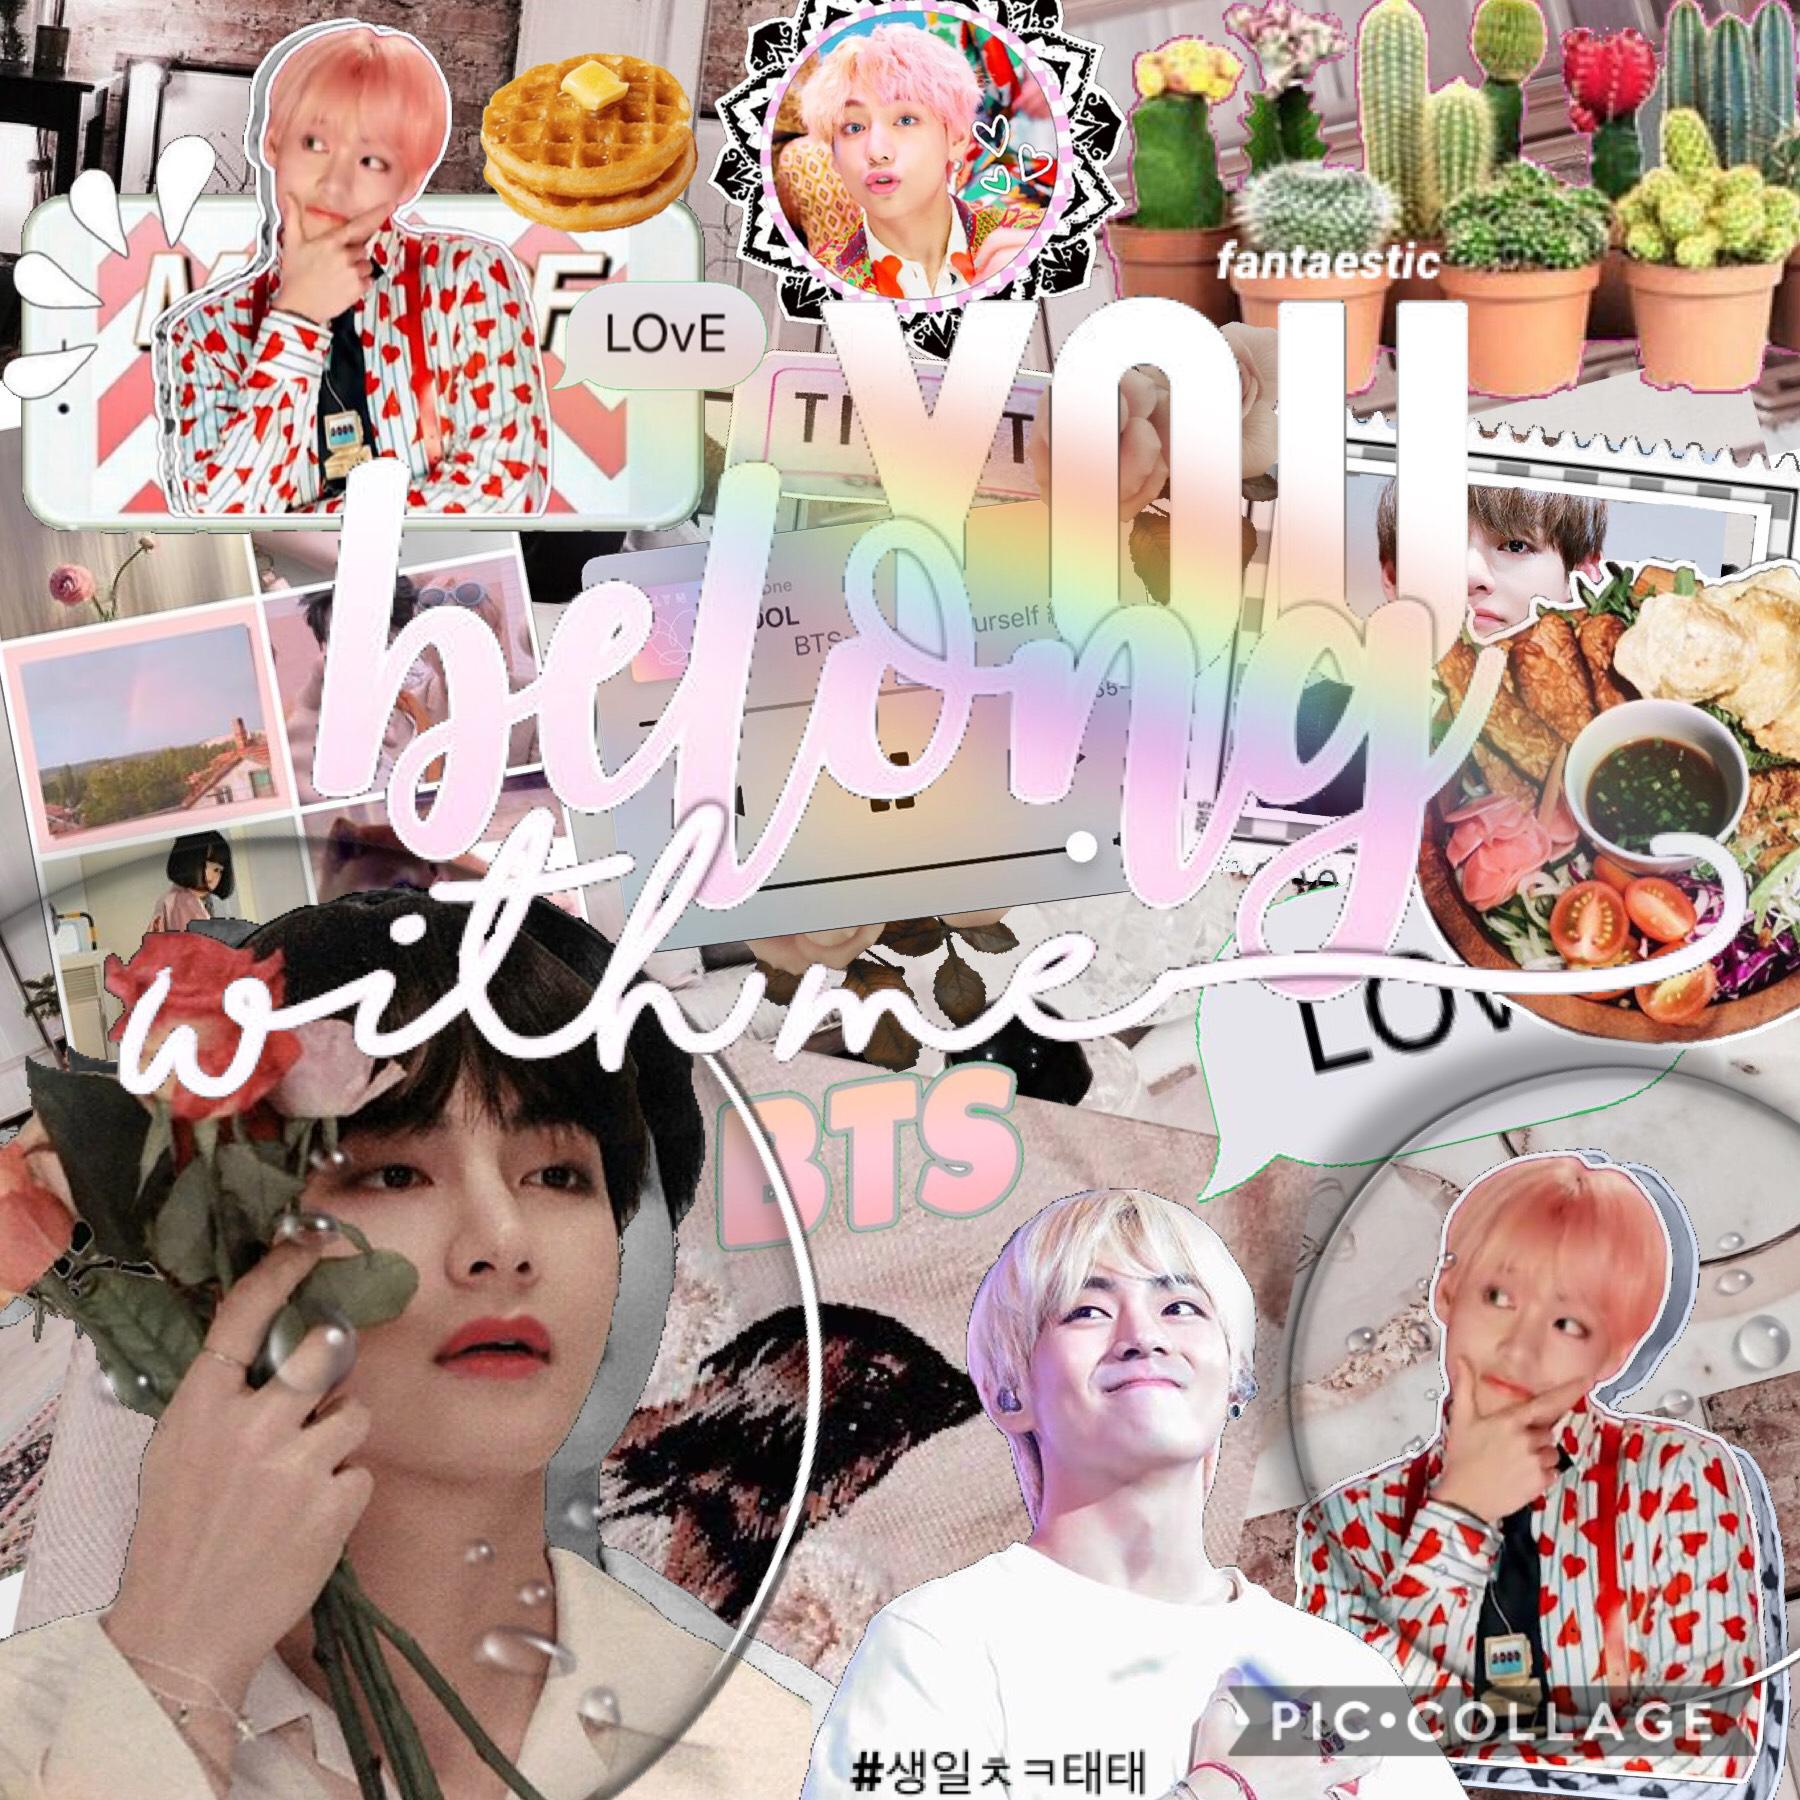 —OPEN ME—
soo this is my first edit... do you guys like it? :)
HAPPY BIRTHDAY TAE WE PURPLE AND LOVE YOU 💜🐯 (it says hbd in korean if you see close).
credits to the respective owner of the overlays and the font!!! 